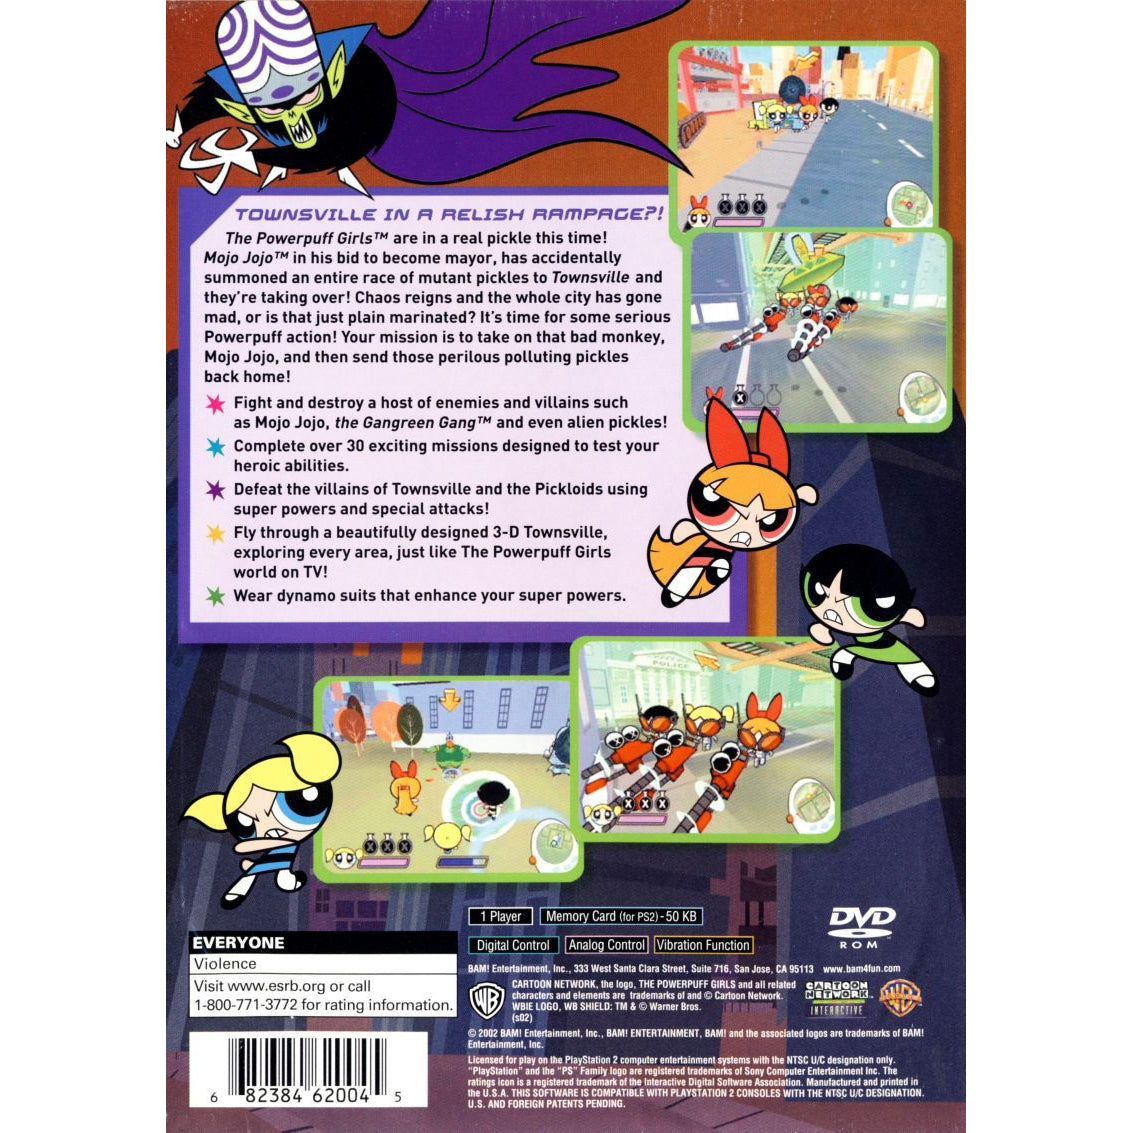 The Powerpuff Girls: Relish Rampage - PlayStation 2 (PS2) Game Complete - YourGamingShop.com - Buy, Sell, Trade Video Games Online. 120 Day Warranty. Satisfaction Guaranteed.